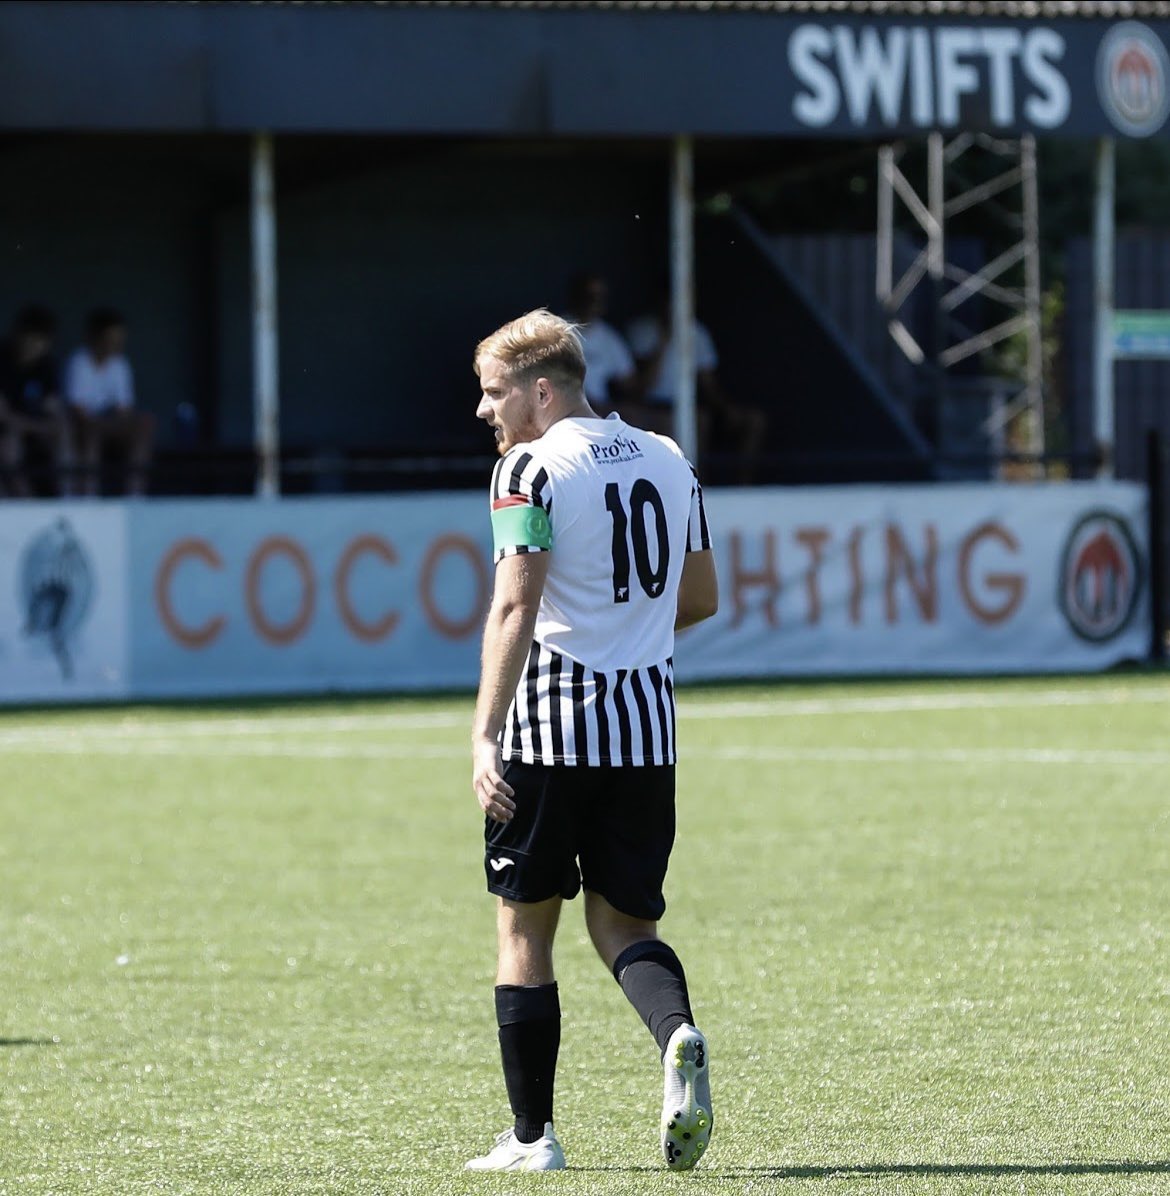 Sausage Stays! 👏

We are delighted to announce that last seasons golden boot winner and fan favourite, Jack Adlington has agreed to stay for the upcoming season! 

#Swifts